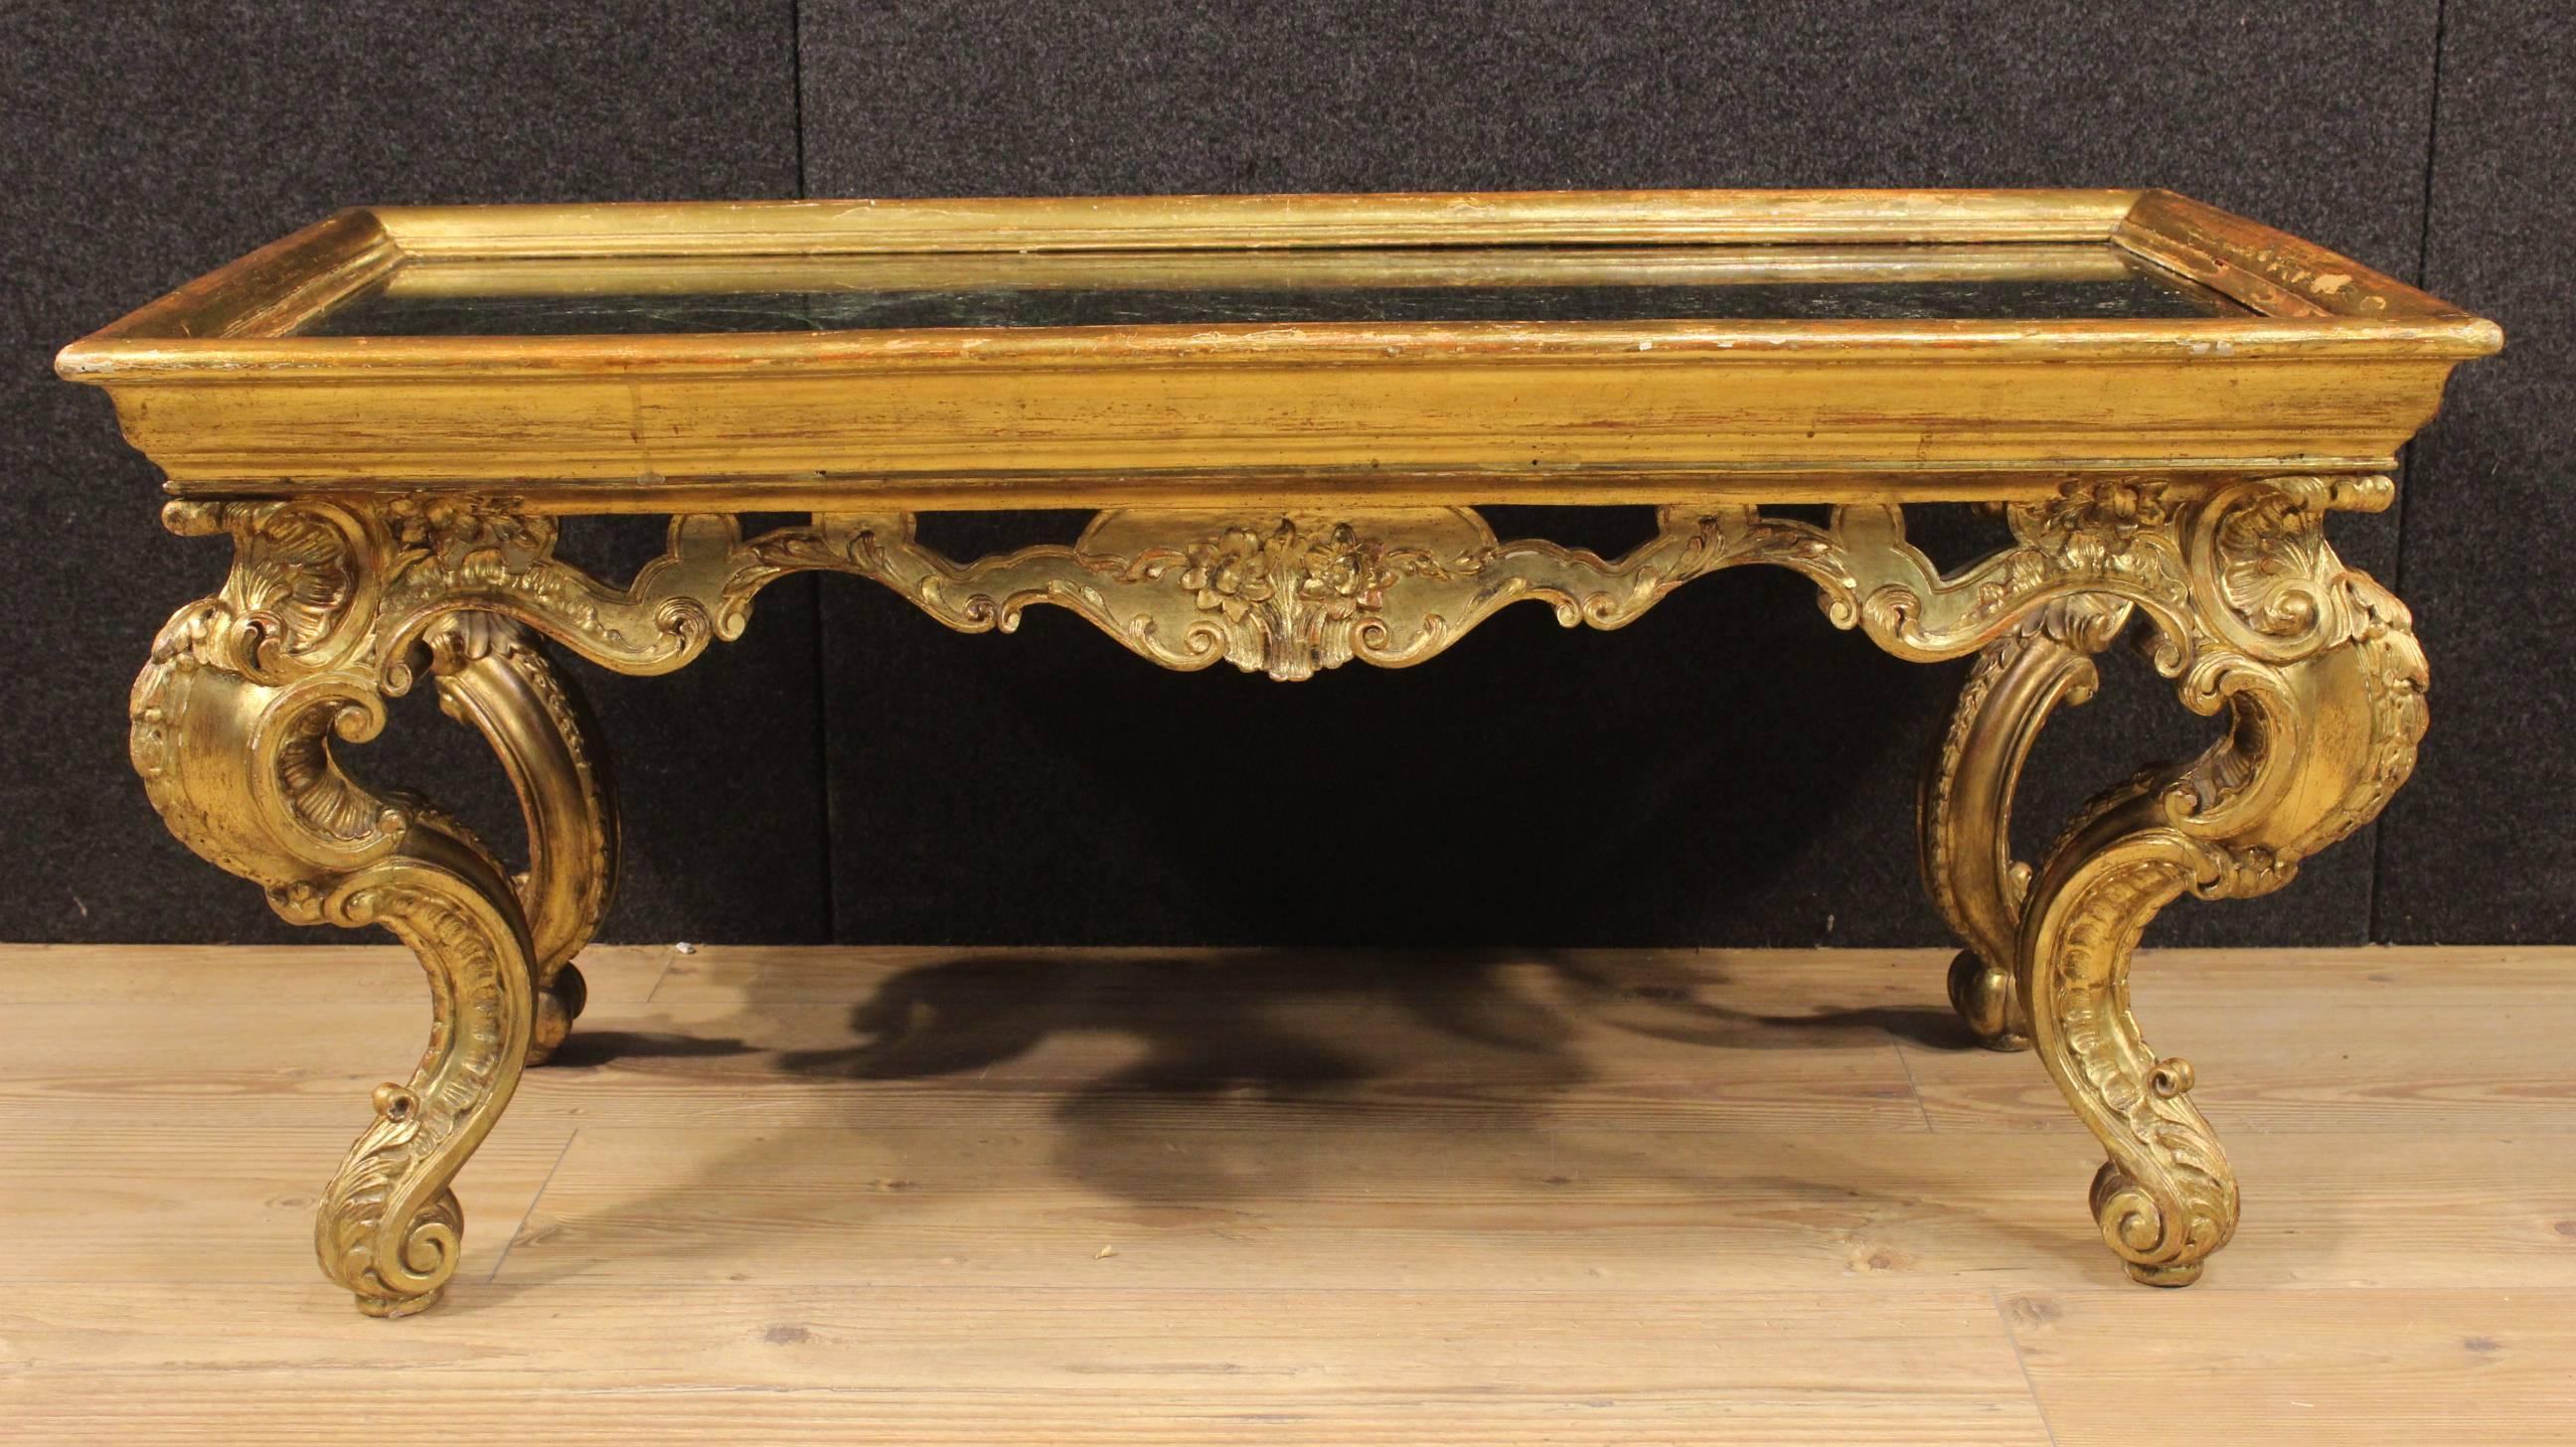 Stylish French table of the 20th century. Furniture made by ornately carved and gilded wood of fabulous line and pleasant decor. Low table of high quality supported by four moved legs of good solidity. Top in original recessed marble of beautiful